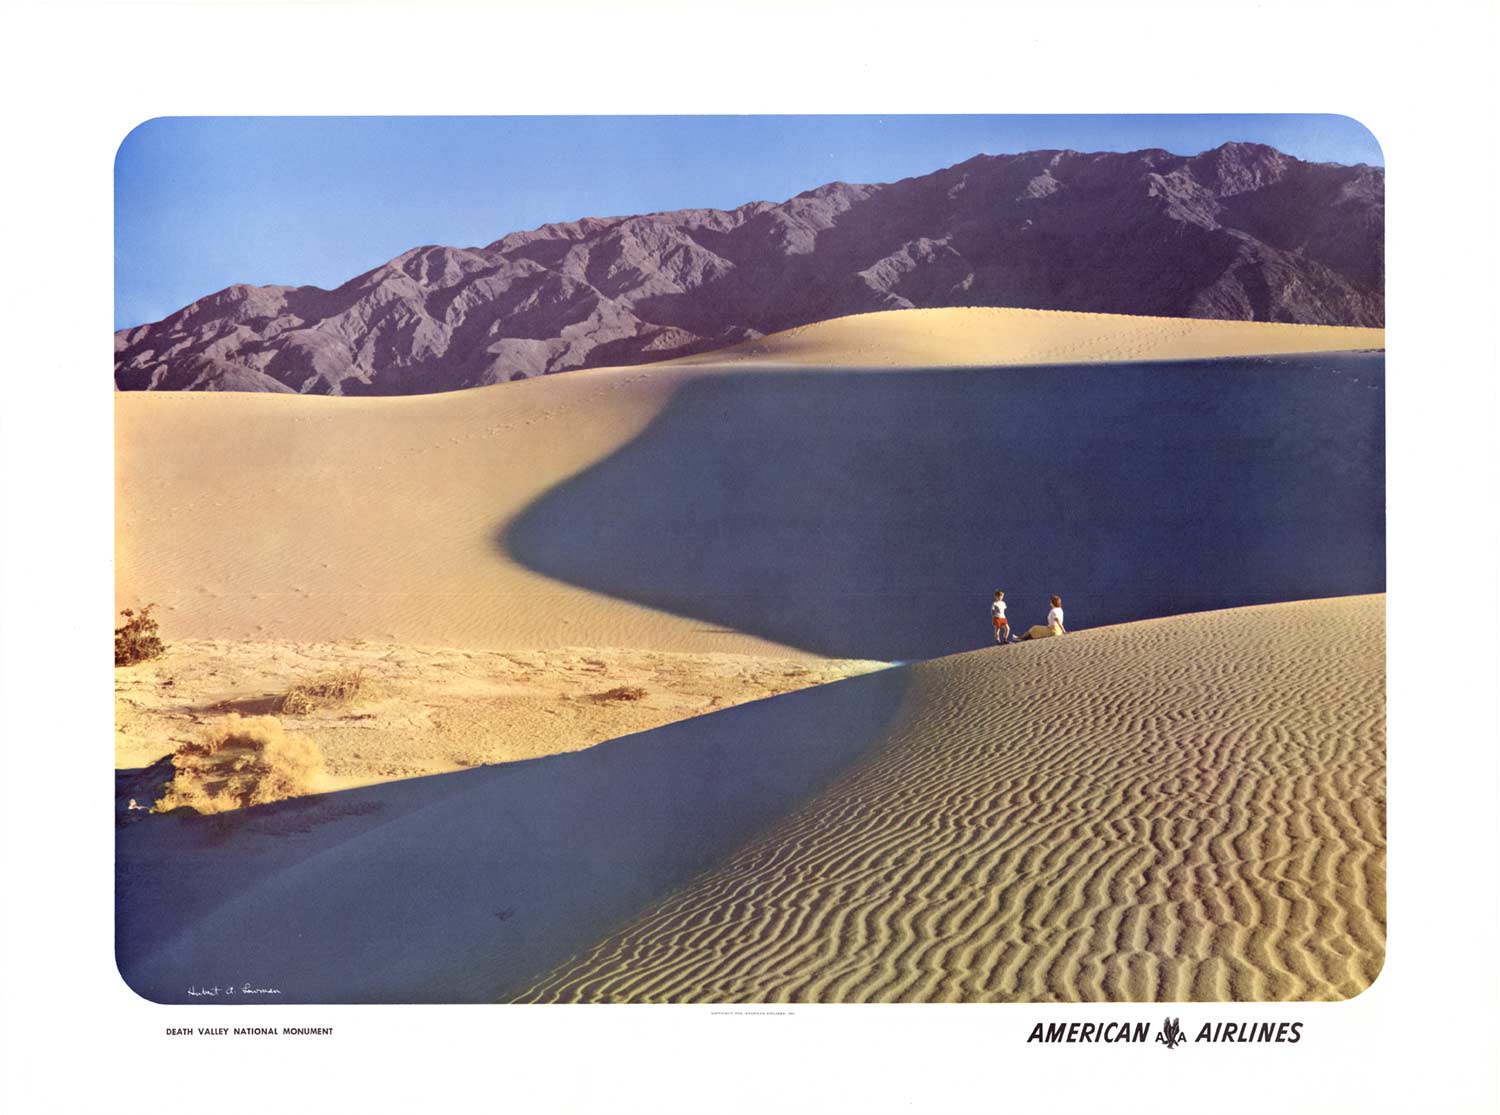 Original Death Valley Monument, American Airlines vintage travel poster. Archivlal linen backed in fine conditon, ready to frame. Horizontal format. Year: 1954 <br>Artist: Hubert A Lowman (1913 - 2006) <br> <br>Death Valley National Monument is a